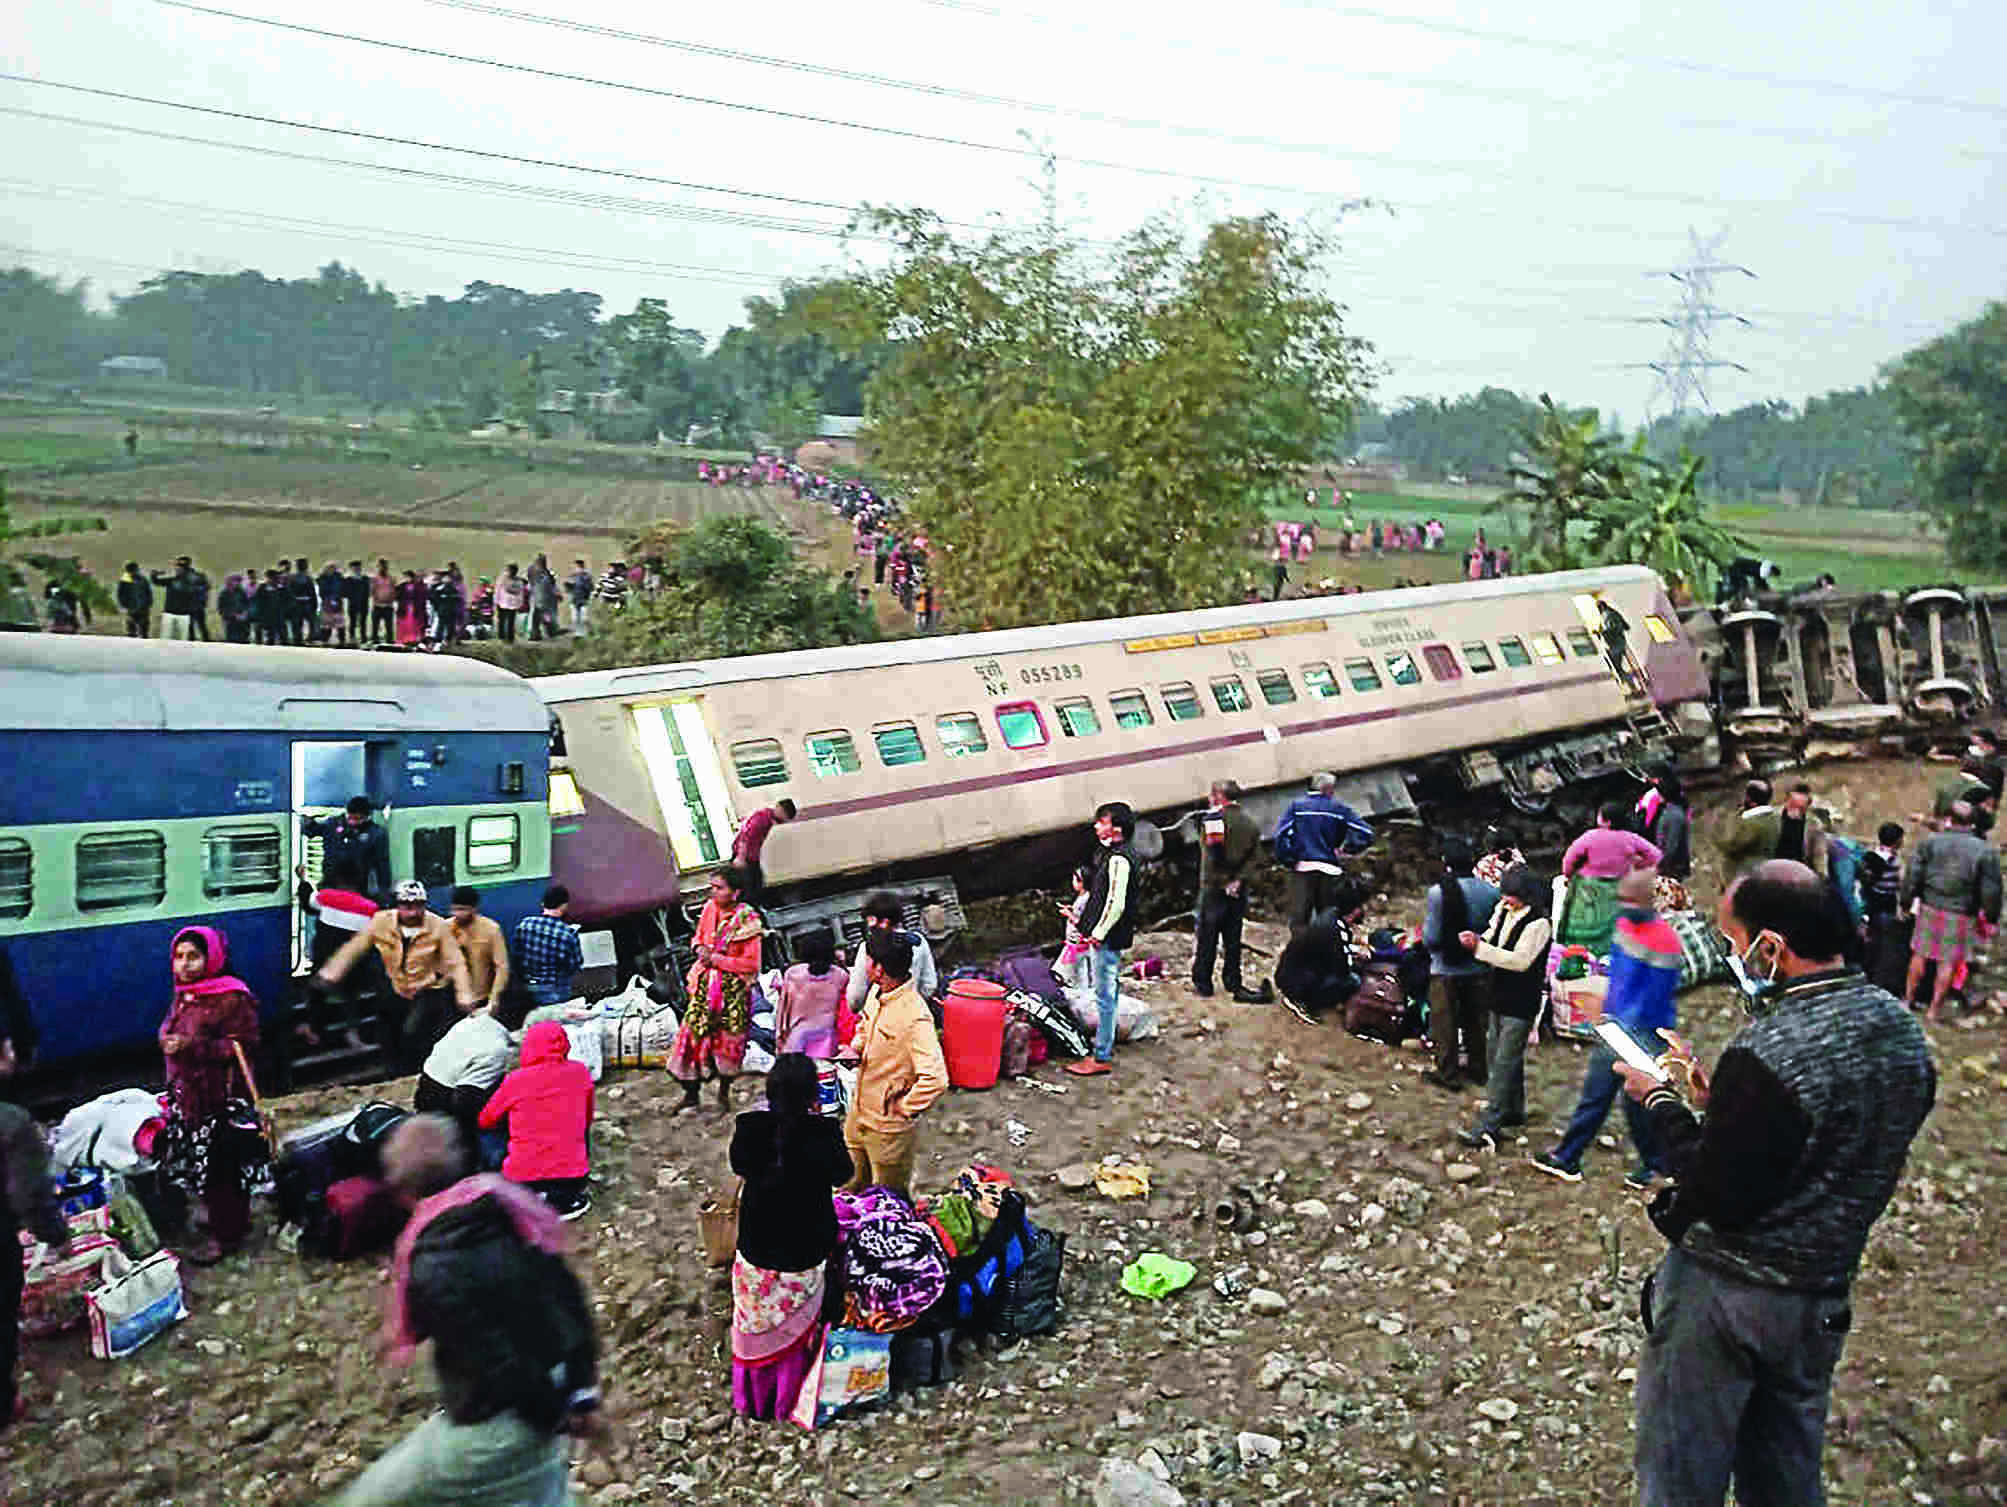 Bengal train accident: At least 6 killed and over 45 injured